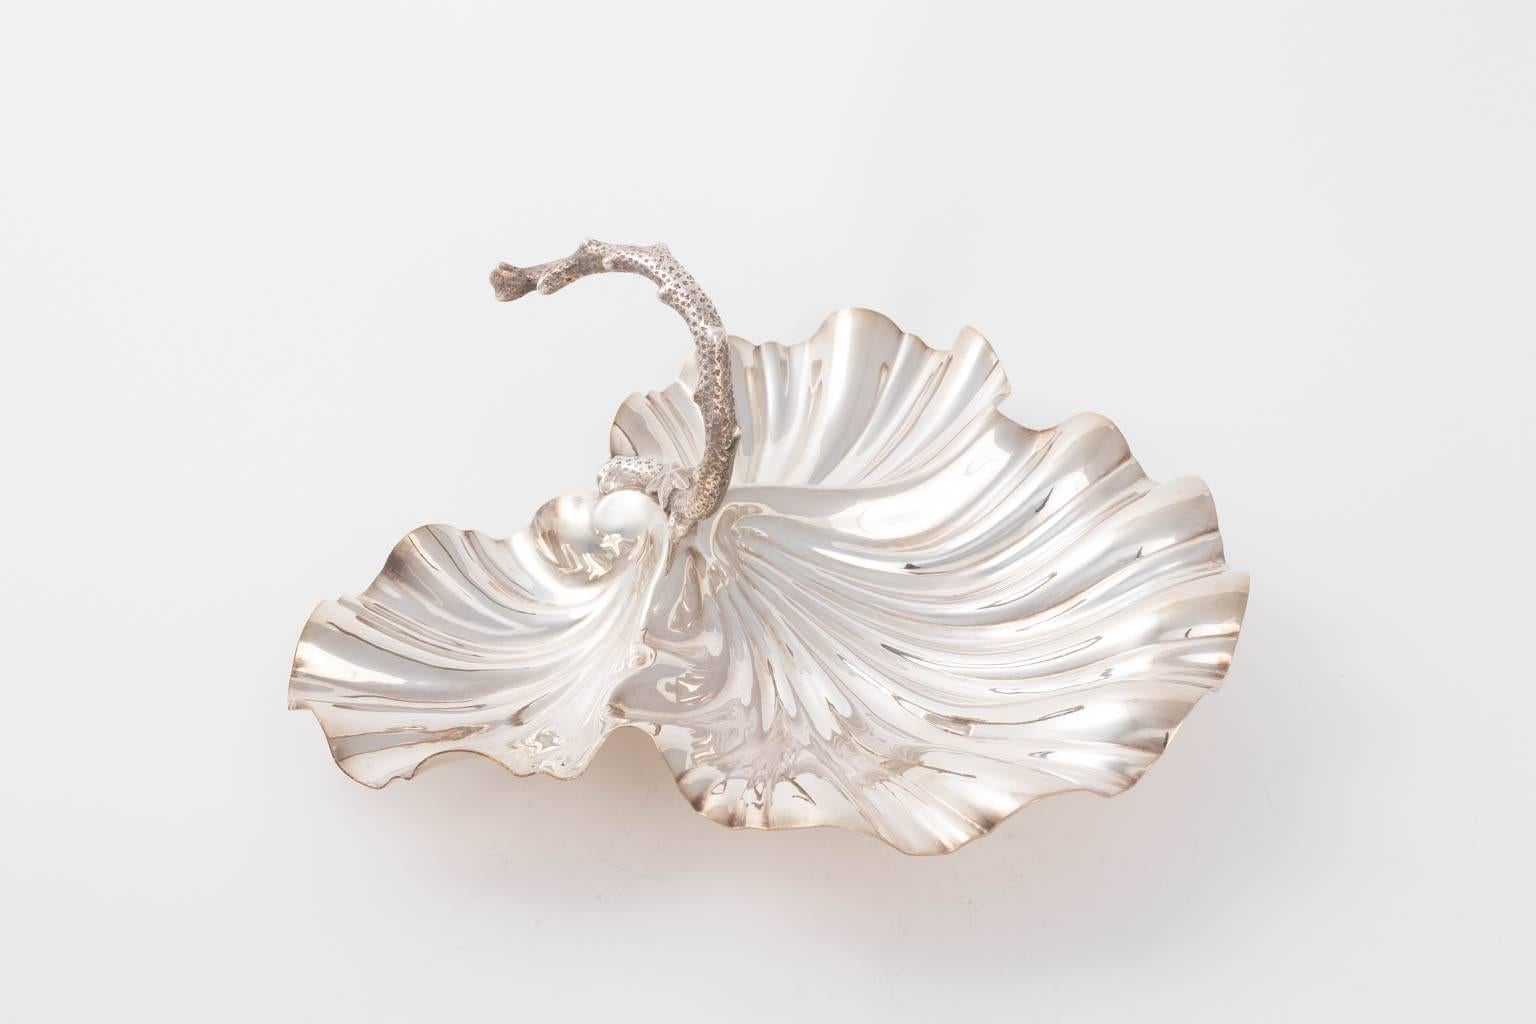 Scallop Shell Silver Plated Serving Dish 3